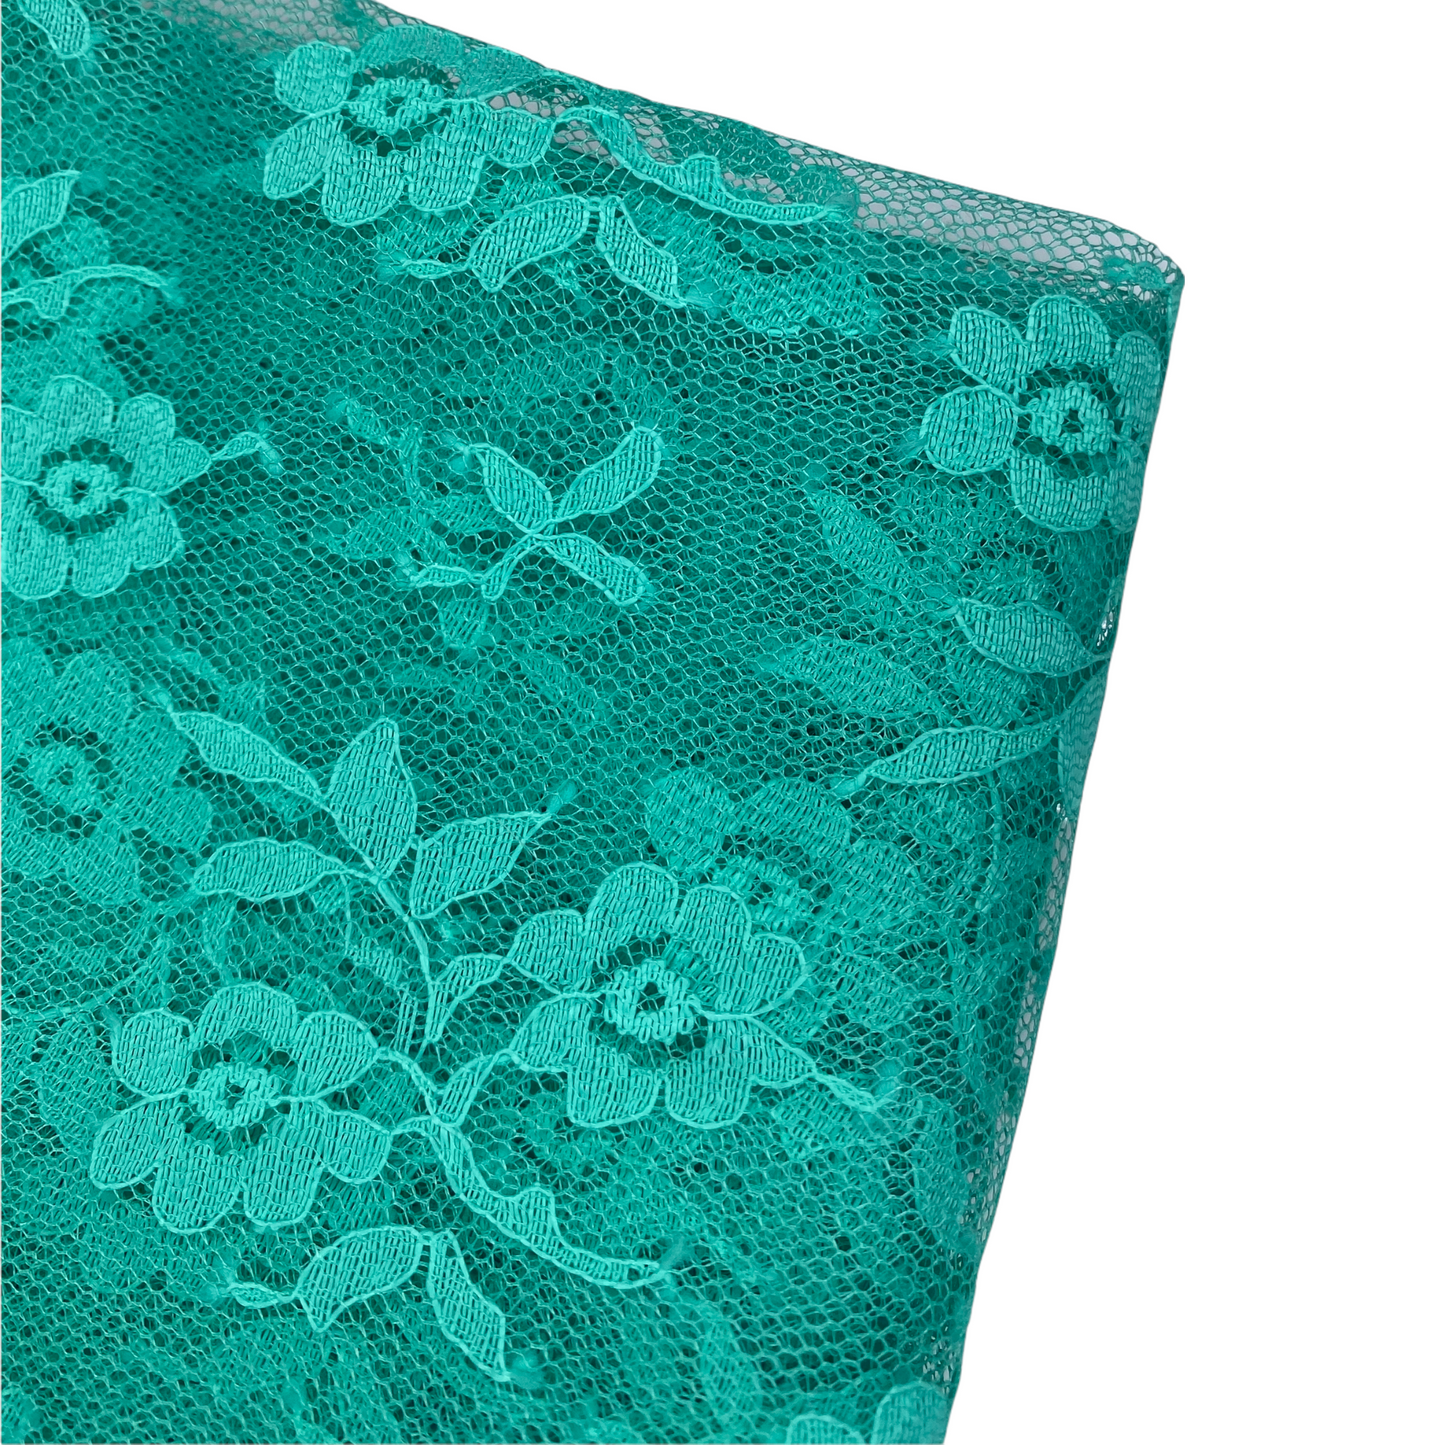 Scalloped Edged Floral Polyester Lace - 52” - Mint Green